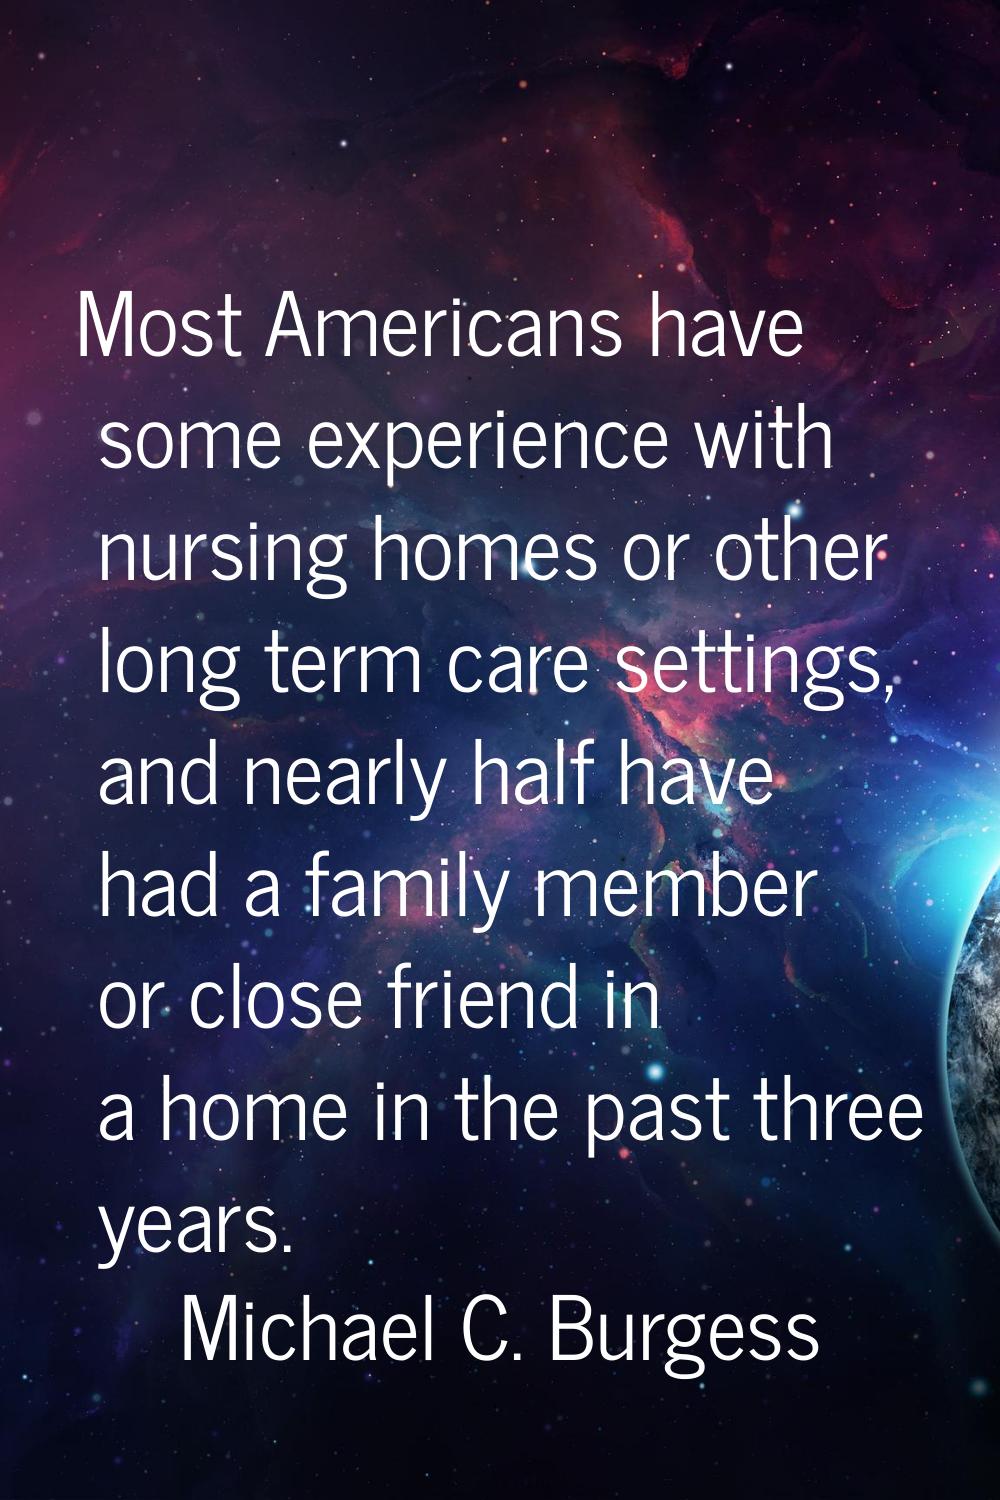 Most Americans have some experience with nursing homes or other long term care settings, and nearly